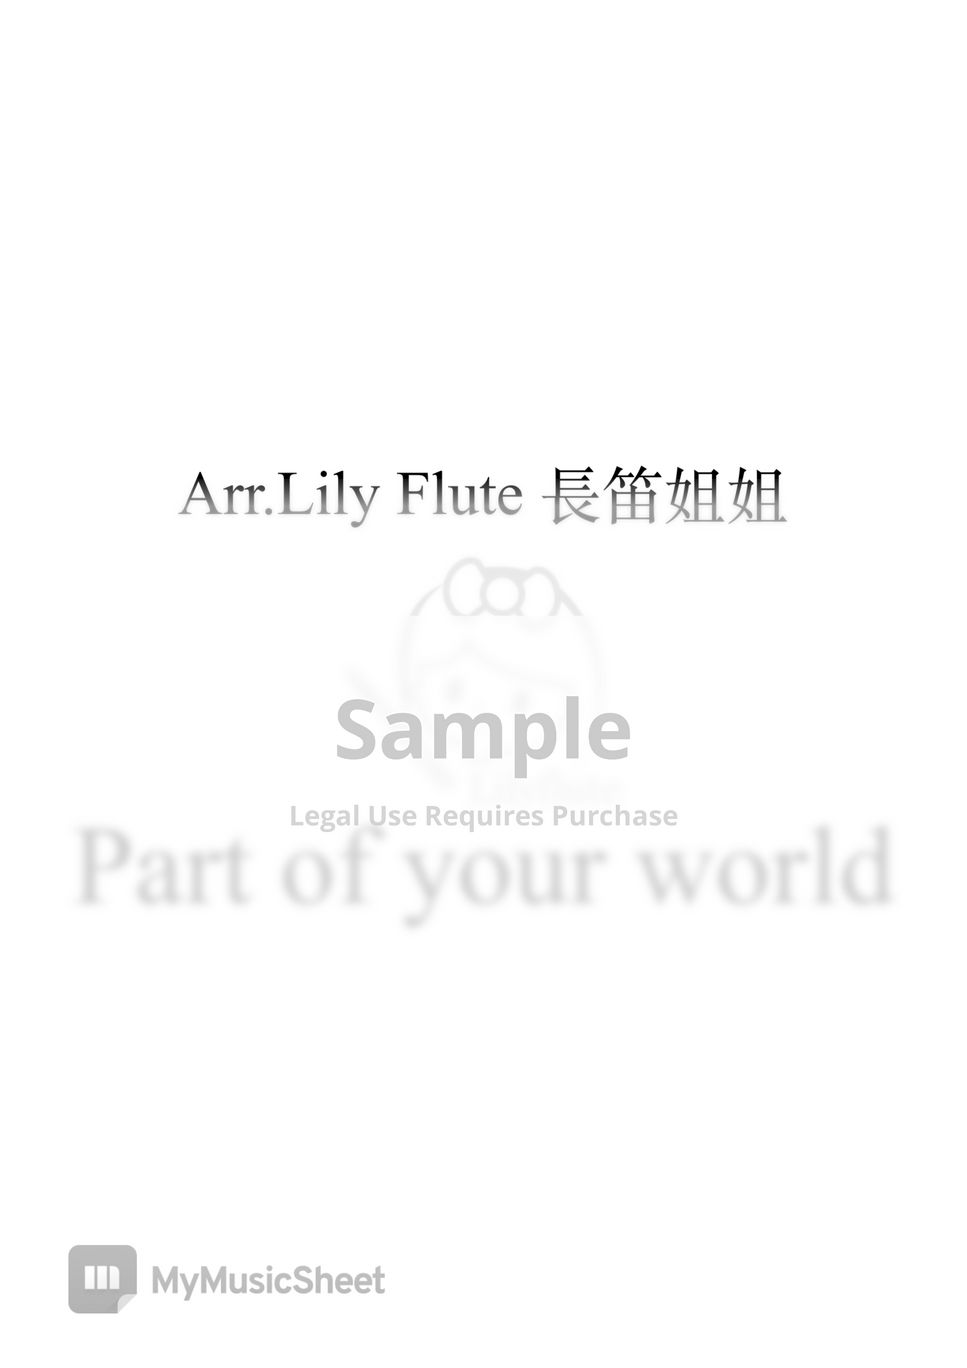 TheLittleMermaid 小美人魚 - Part of Your World (附伴奏搭配) by Lily Flute 長笛姐姐